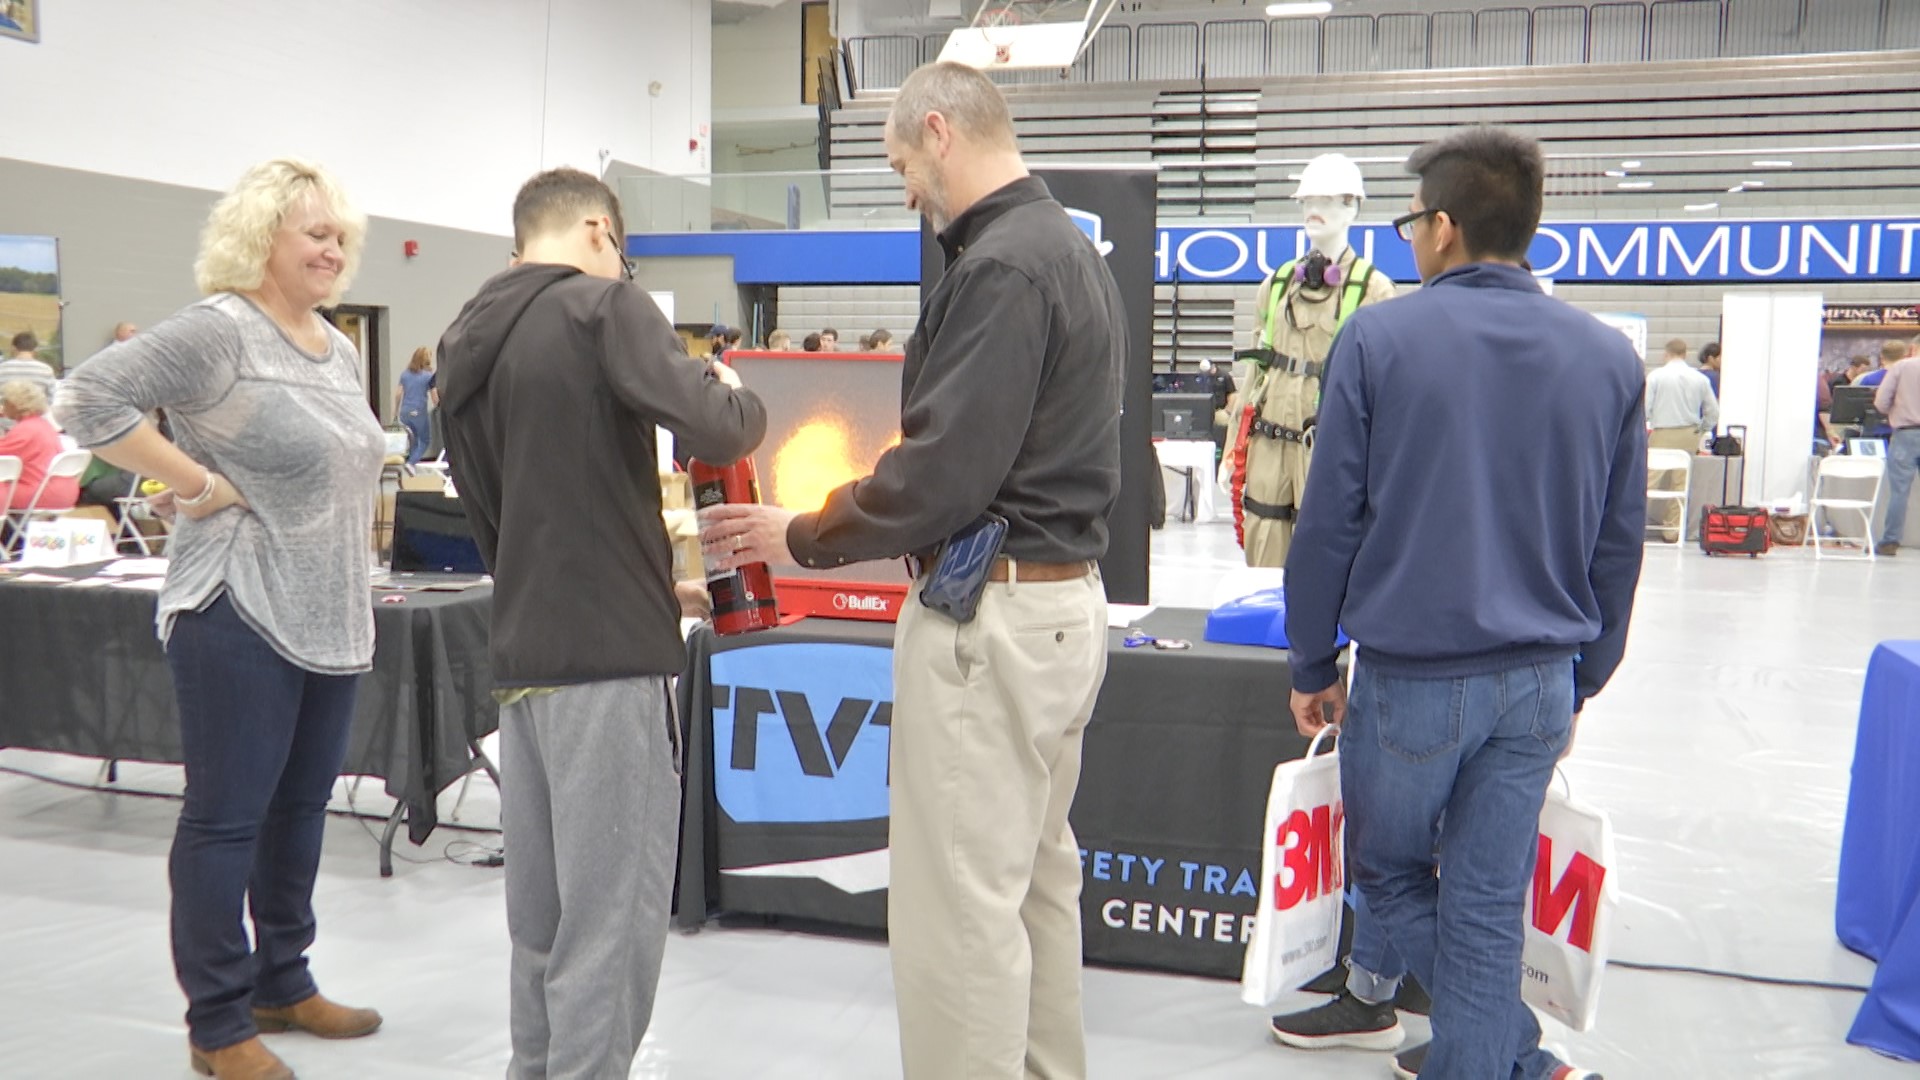 Job fair organizers want local high school students in the Tennessee Valley workforce.